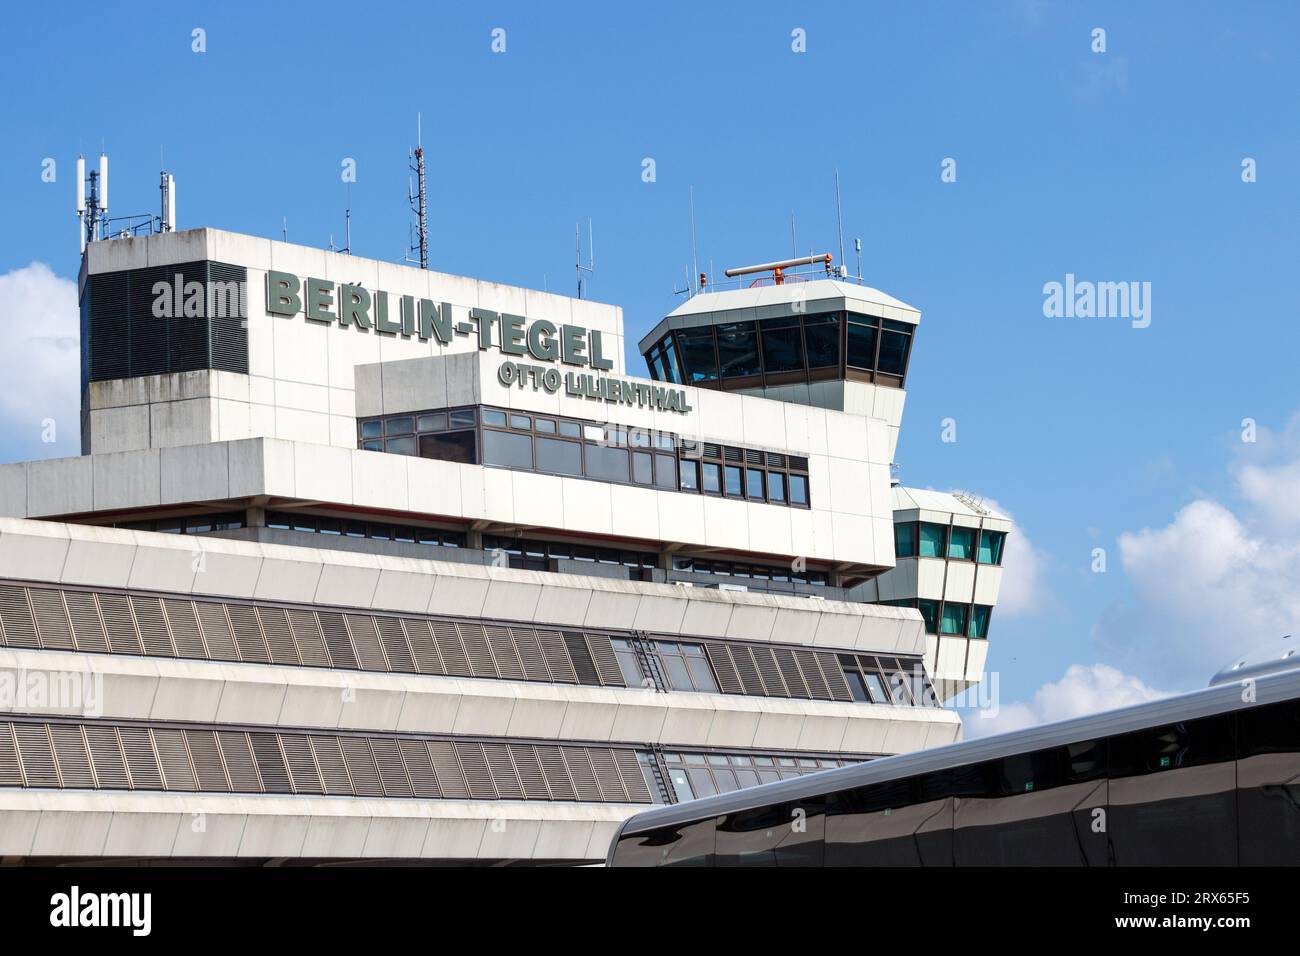 The control tower at Berlin Tegel airport, Germany Stock Photo